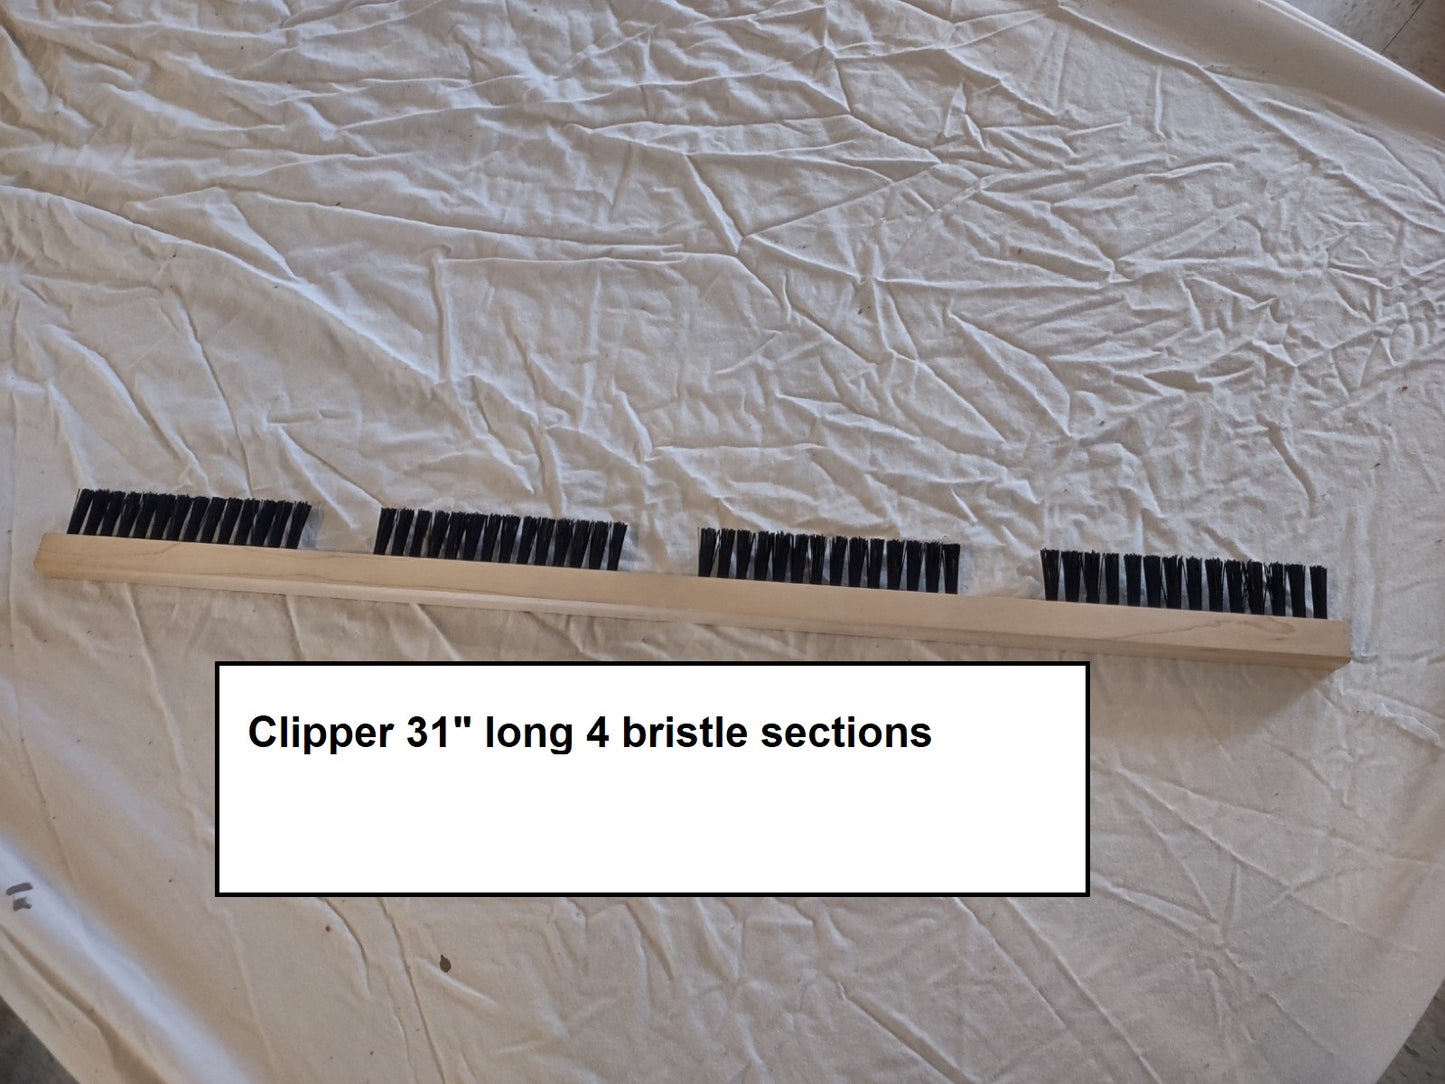 Clipper Screen Cleaning Brushes